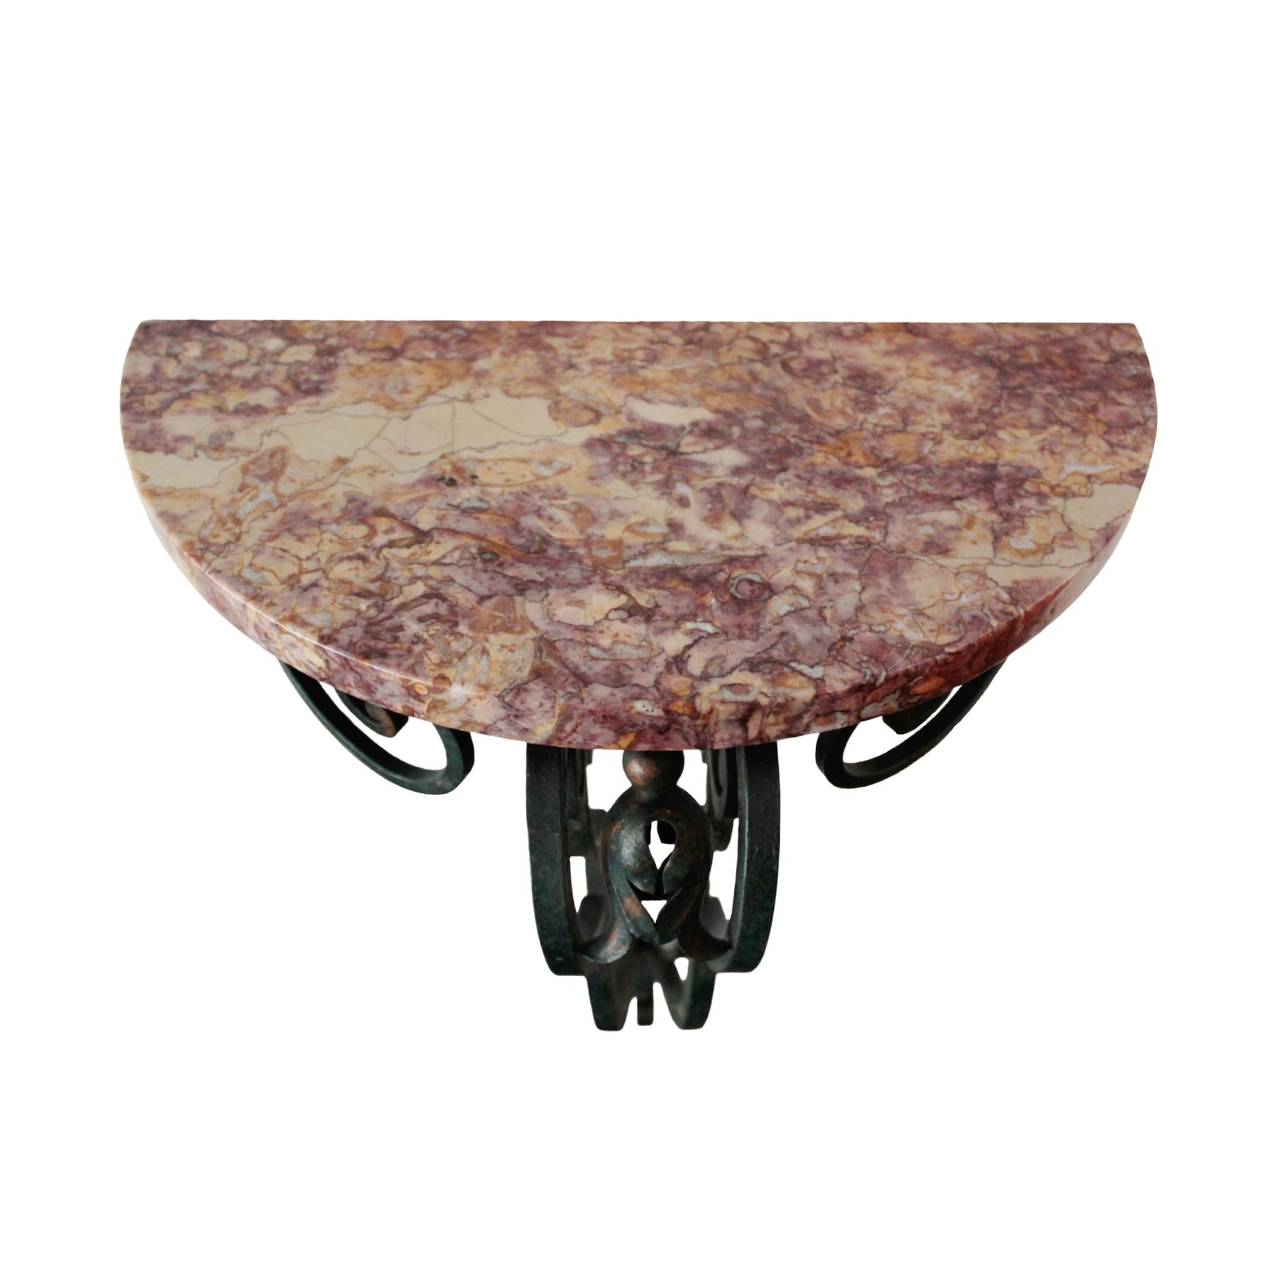 Mid-20th Century Petite French fer forge and demilune marble top wall console